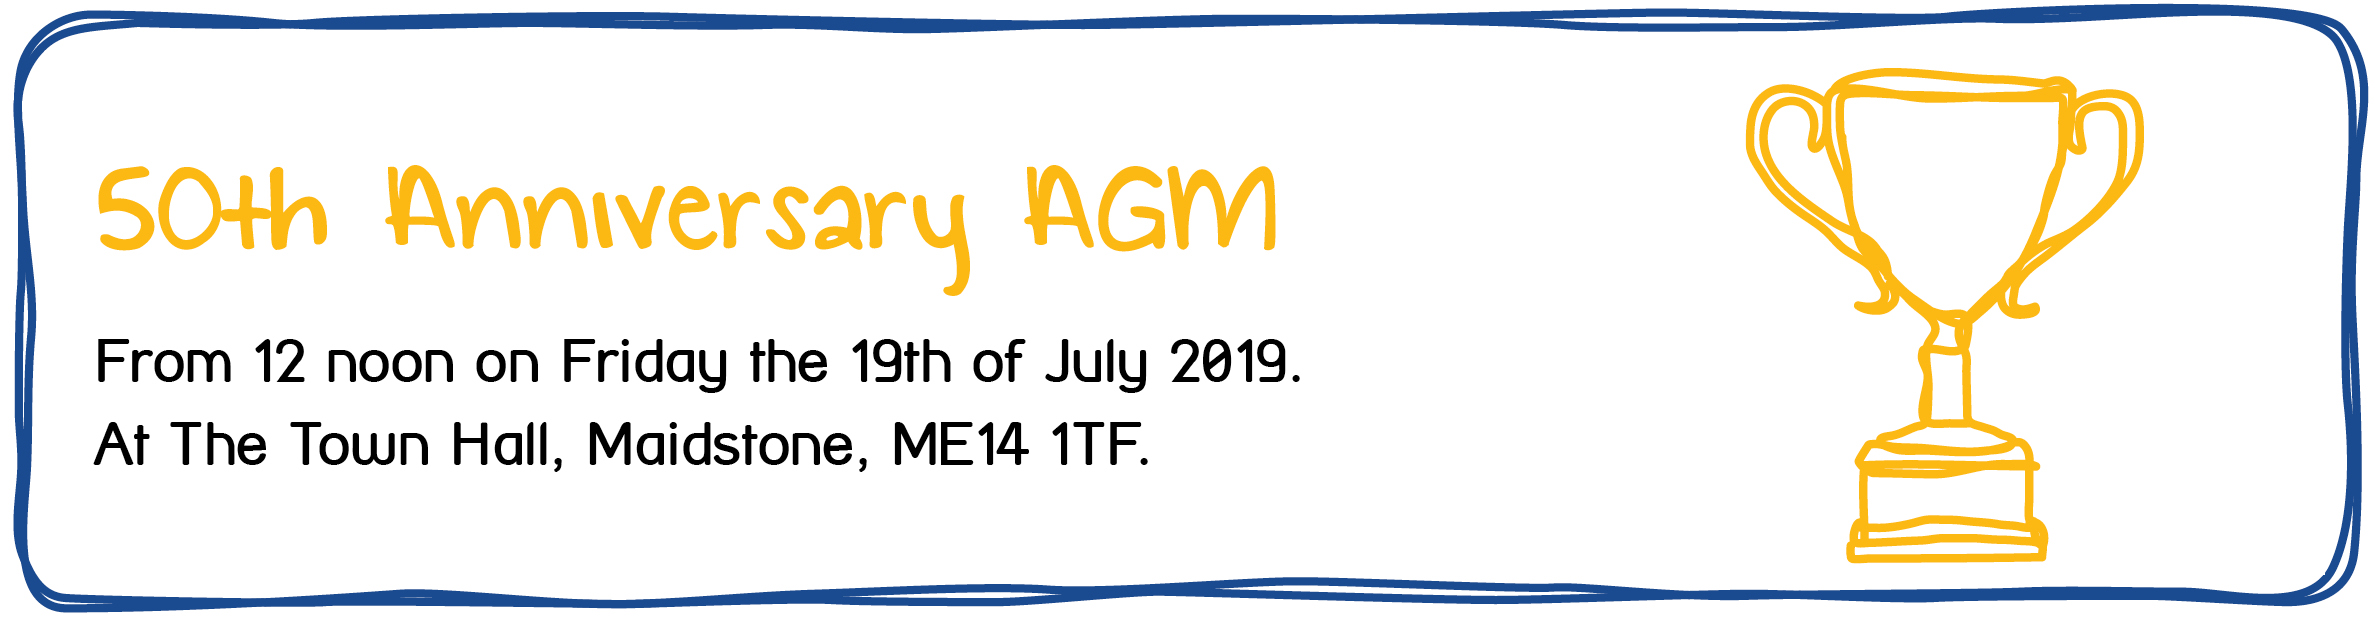 Maidstone and Mid-Kent Mind's 50th Anniversary AGM - From 12 noon on Friday the 19th of July 2019. At the Town Hall, Maidstone, ME14 1TF.